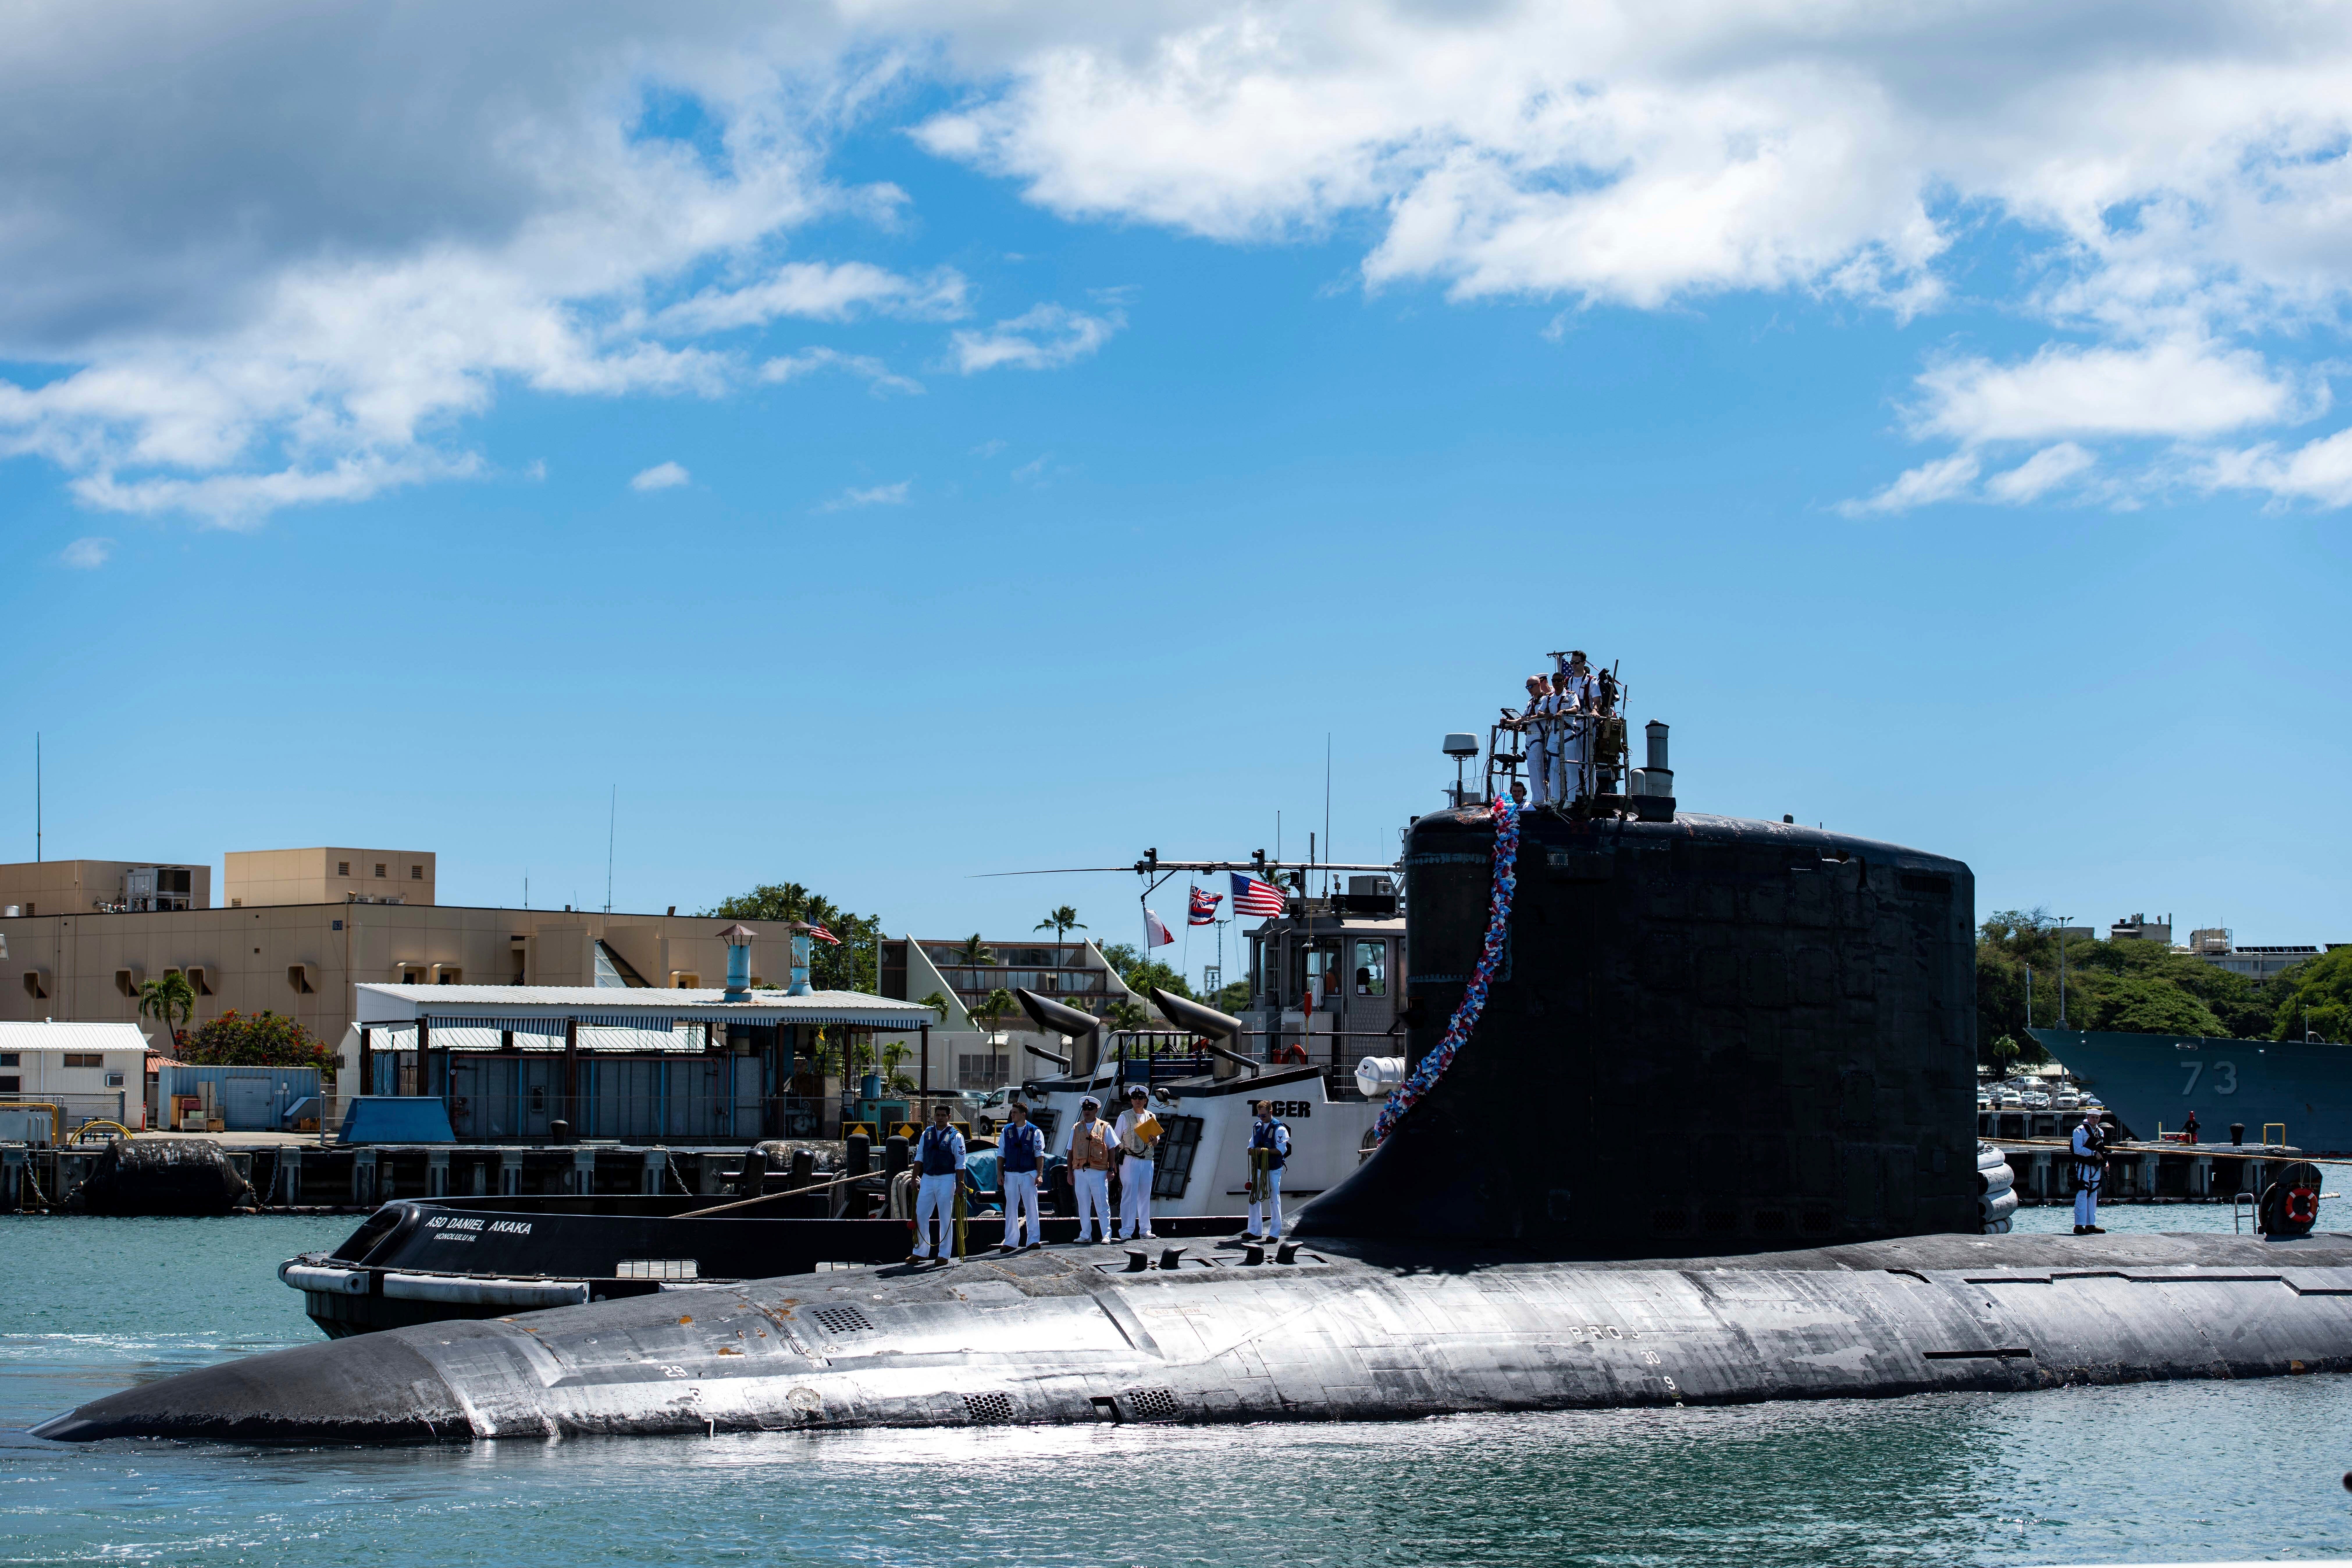 In this photo provided by U.S. Navy, the Virginia-class fast-attack submarine USS Illinois (SSN 786) returns home to Joint Base Pearl Harbor-Hickam from a deployment in the 7th Fleet area of responsibility on Sept. 13, 2021.Australia decided to invest in U.S. nuclear-powered submarines and dump its contract with France to build diesel-electric submarines because of a changed strategic environment, Prime Minister Scott Morrison said on Thursday, Sept. 16, 2021. (Mass Communication Specialist 1st Class Michael B. Zingaro/U.S. Navy via AP)